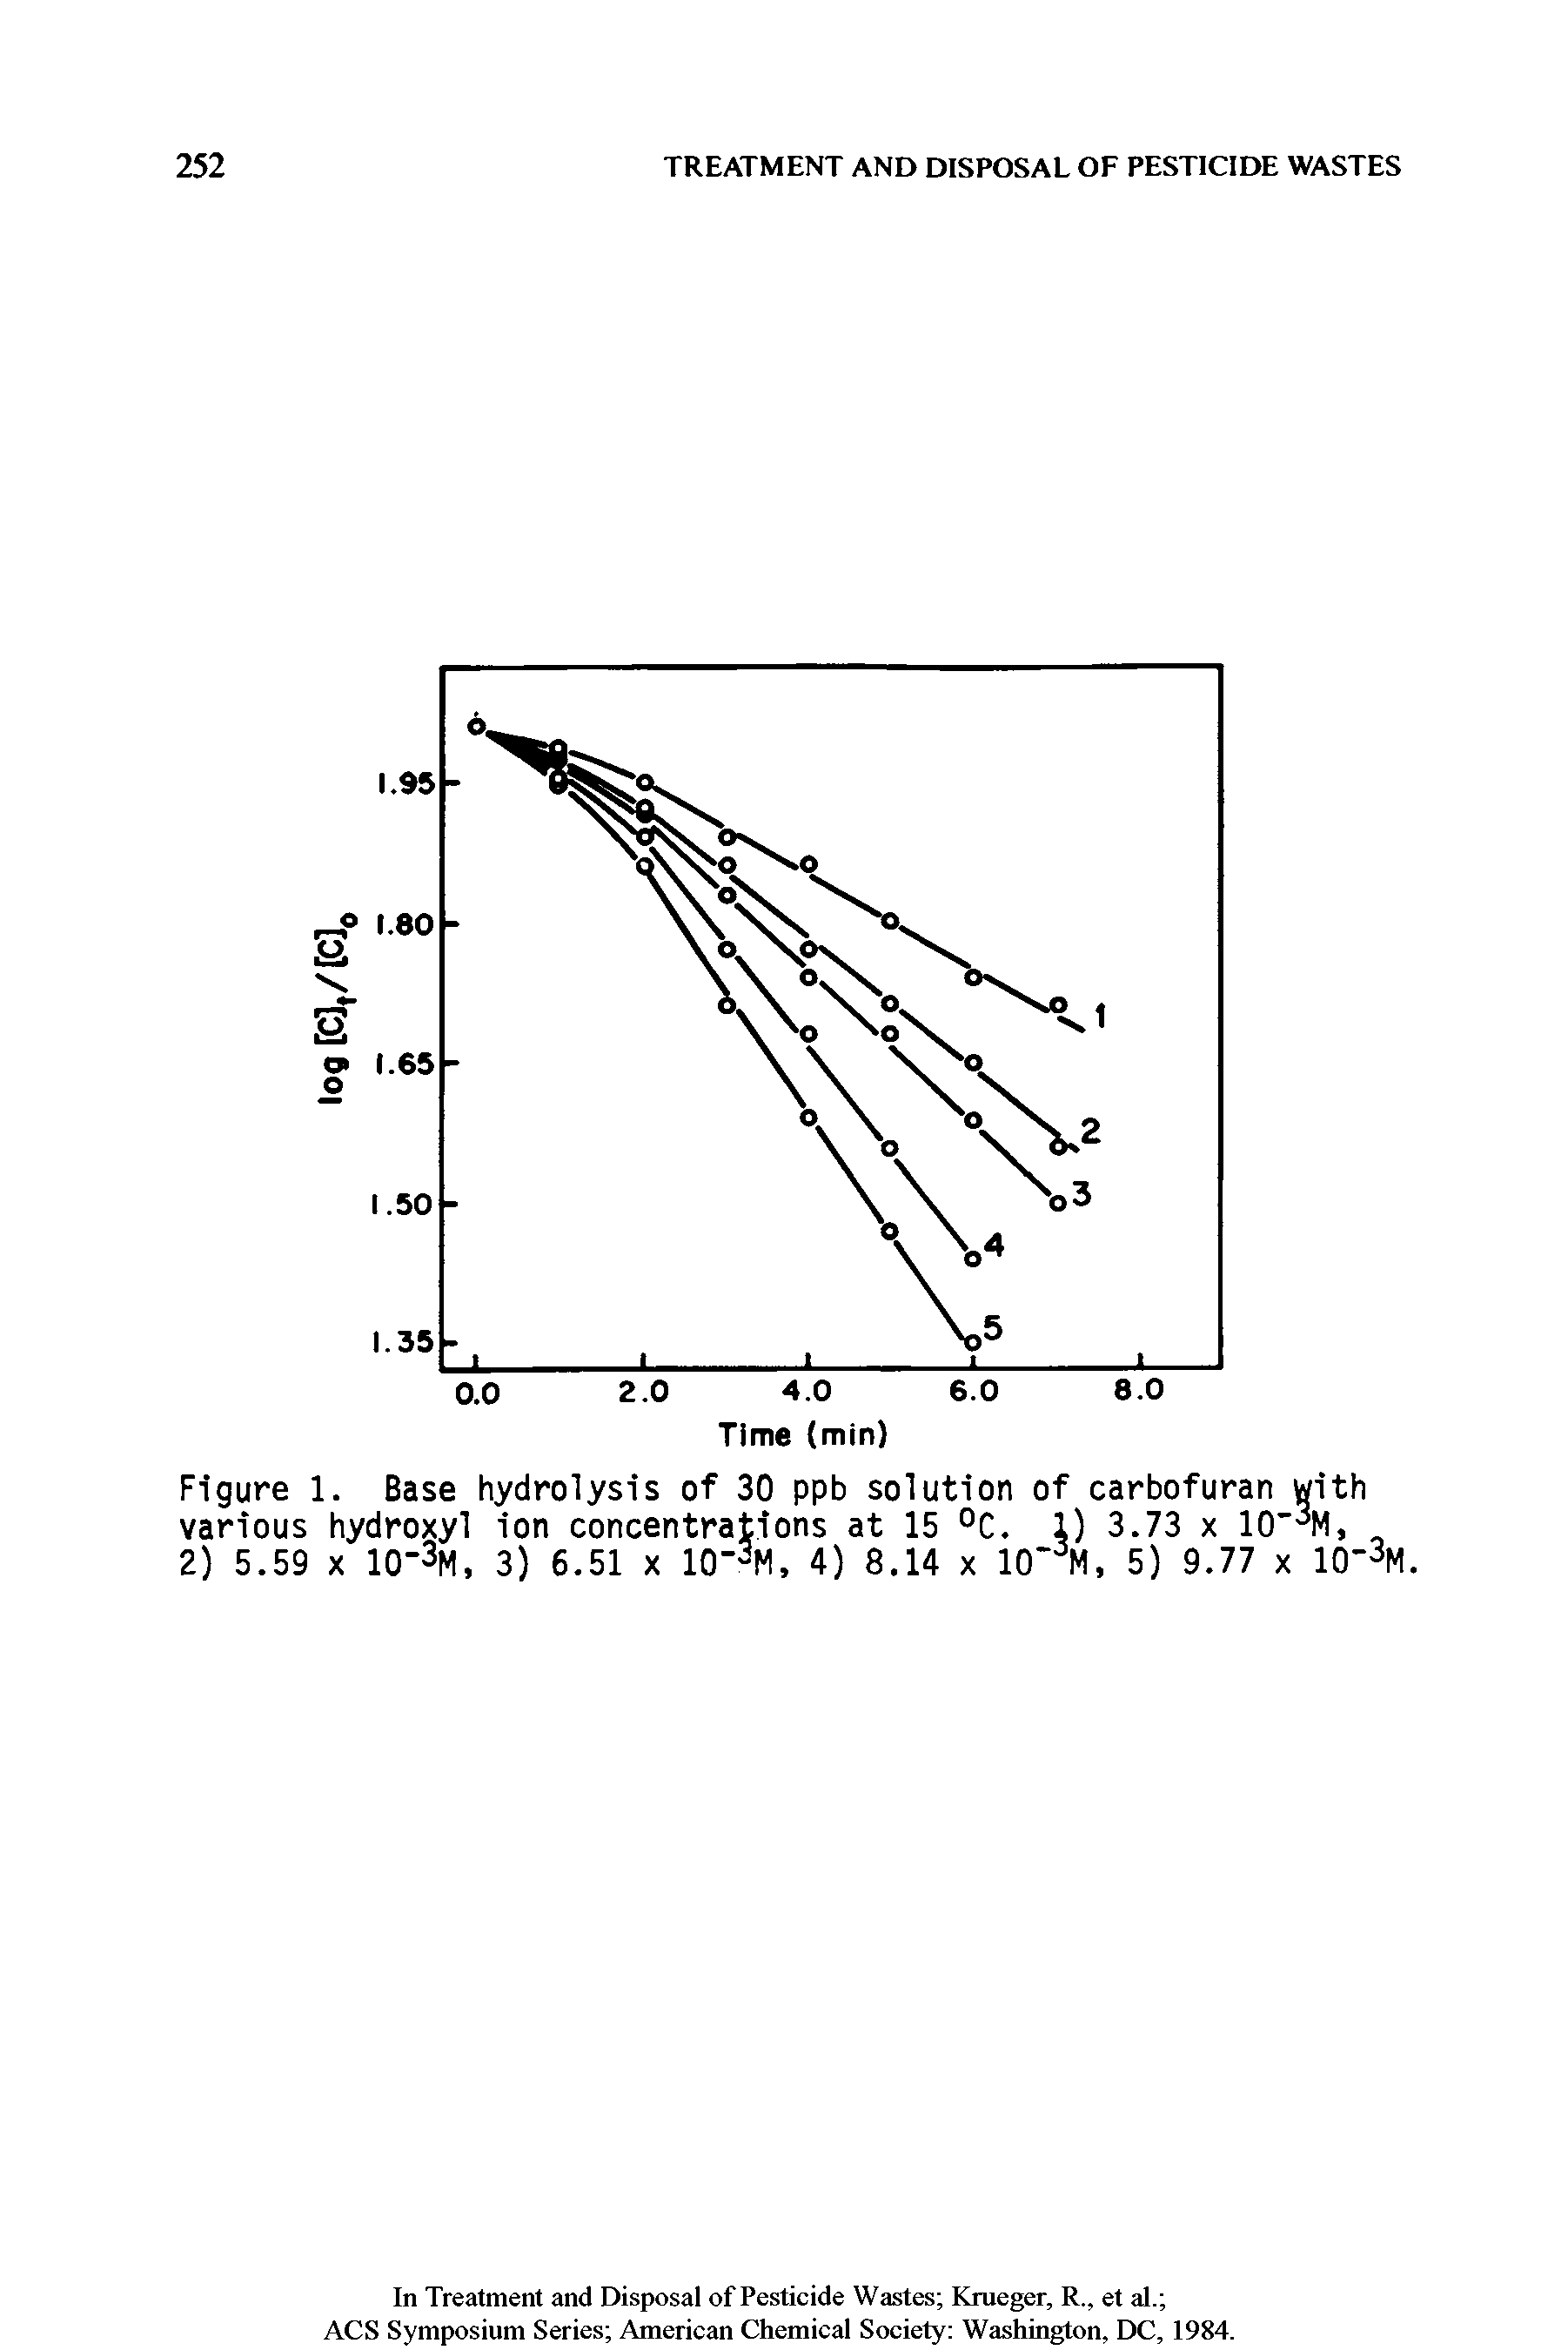 Figure 1. Base hydrolysis of 30 ppb solution of carbofuran with various hydroxyl ion concentrations at 15 °C. 1) 3.73 x 10" M,...